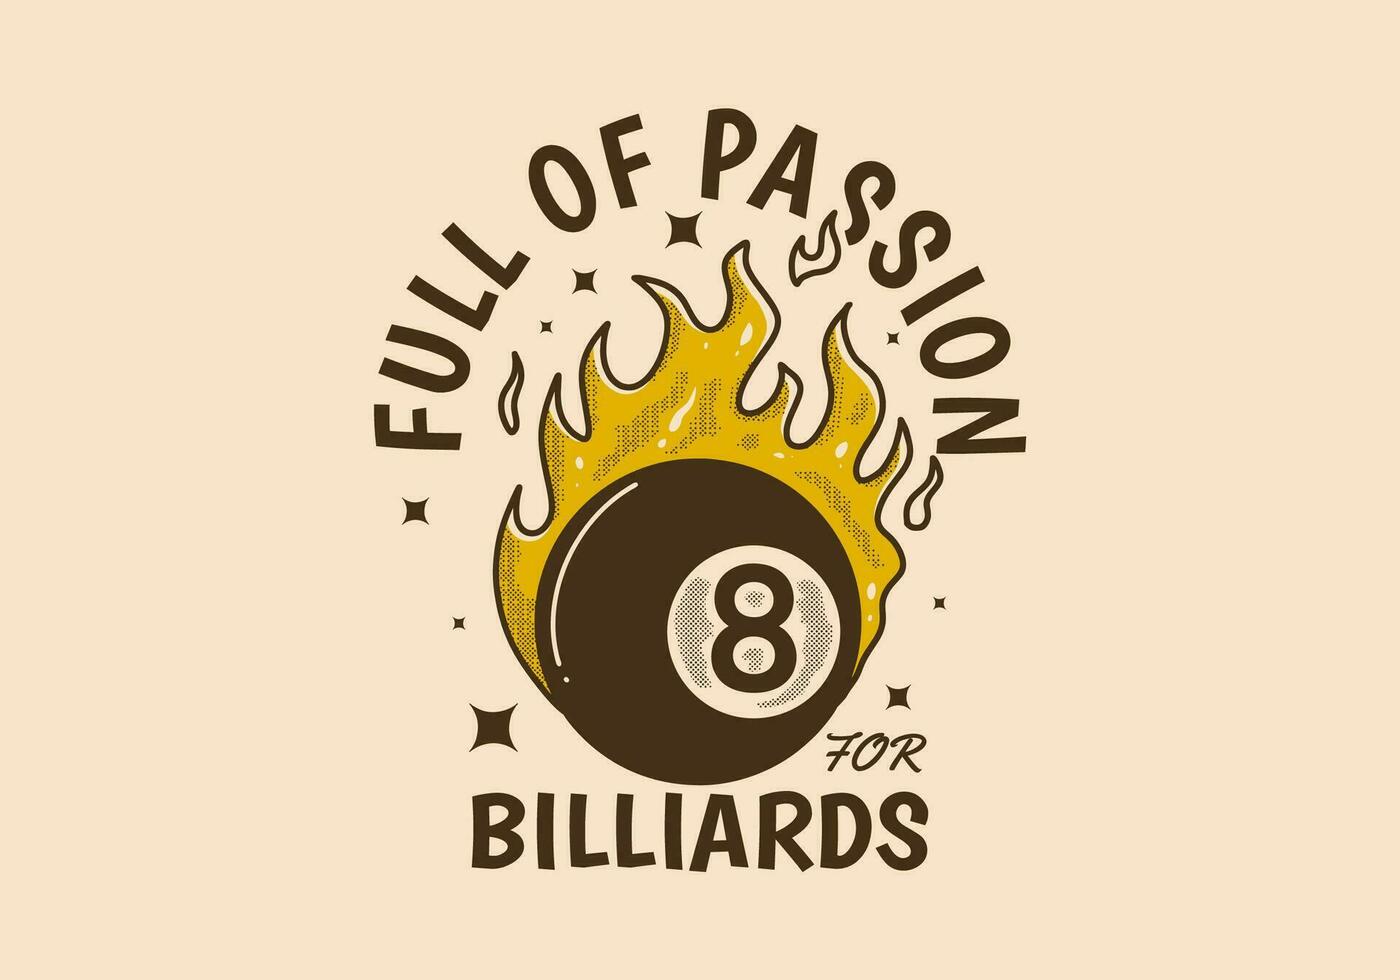 Full of passion for billiards. Vintage illustration of eight ball with fire flame vector